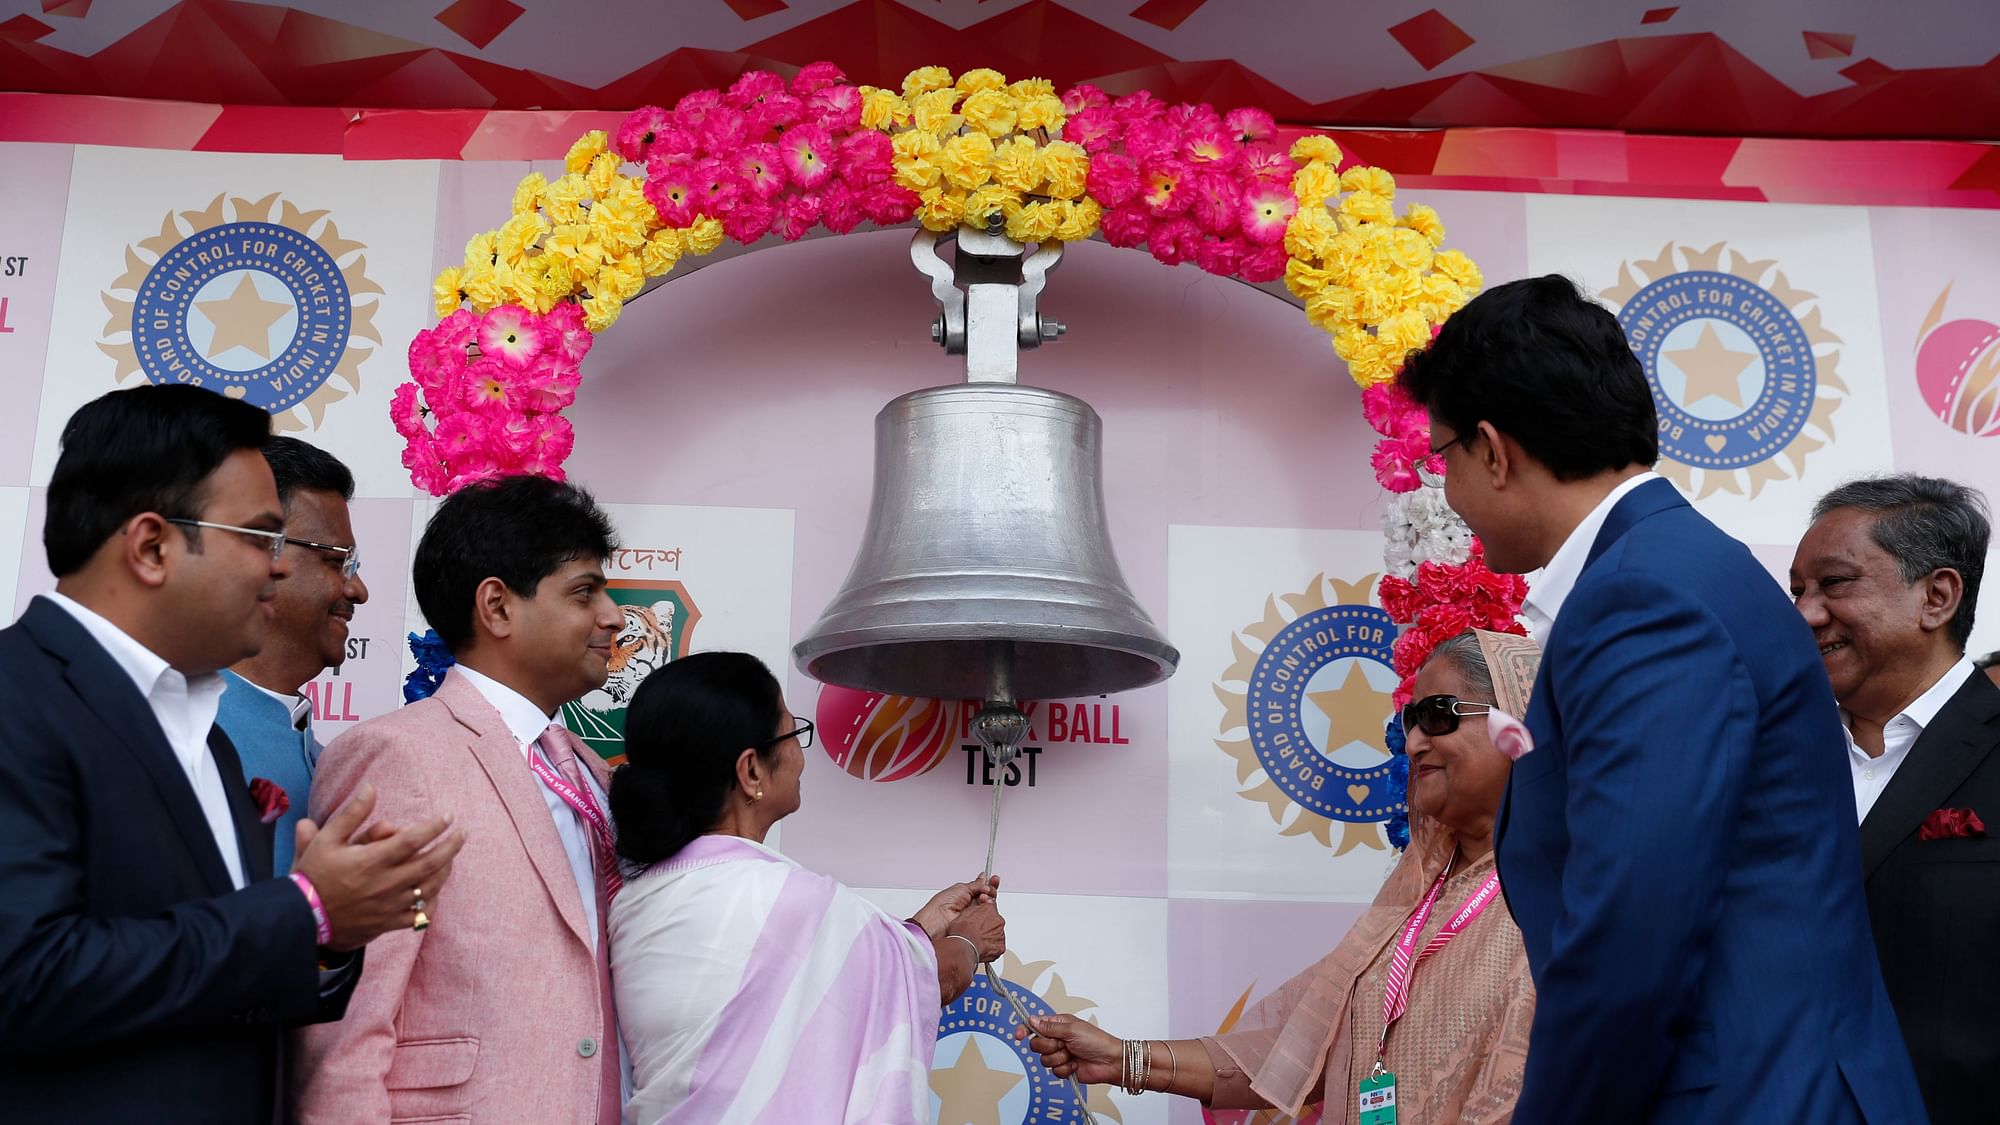  Bangladesh Prime Minister Sheikh Hasina and West Bengal Chief Minister Mamata Banerjee rung the customary Eden bell.